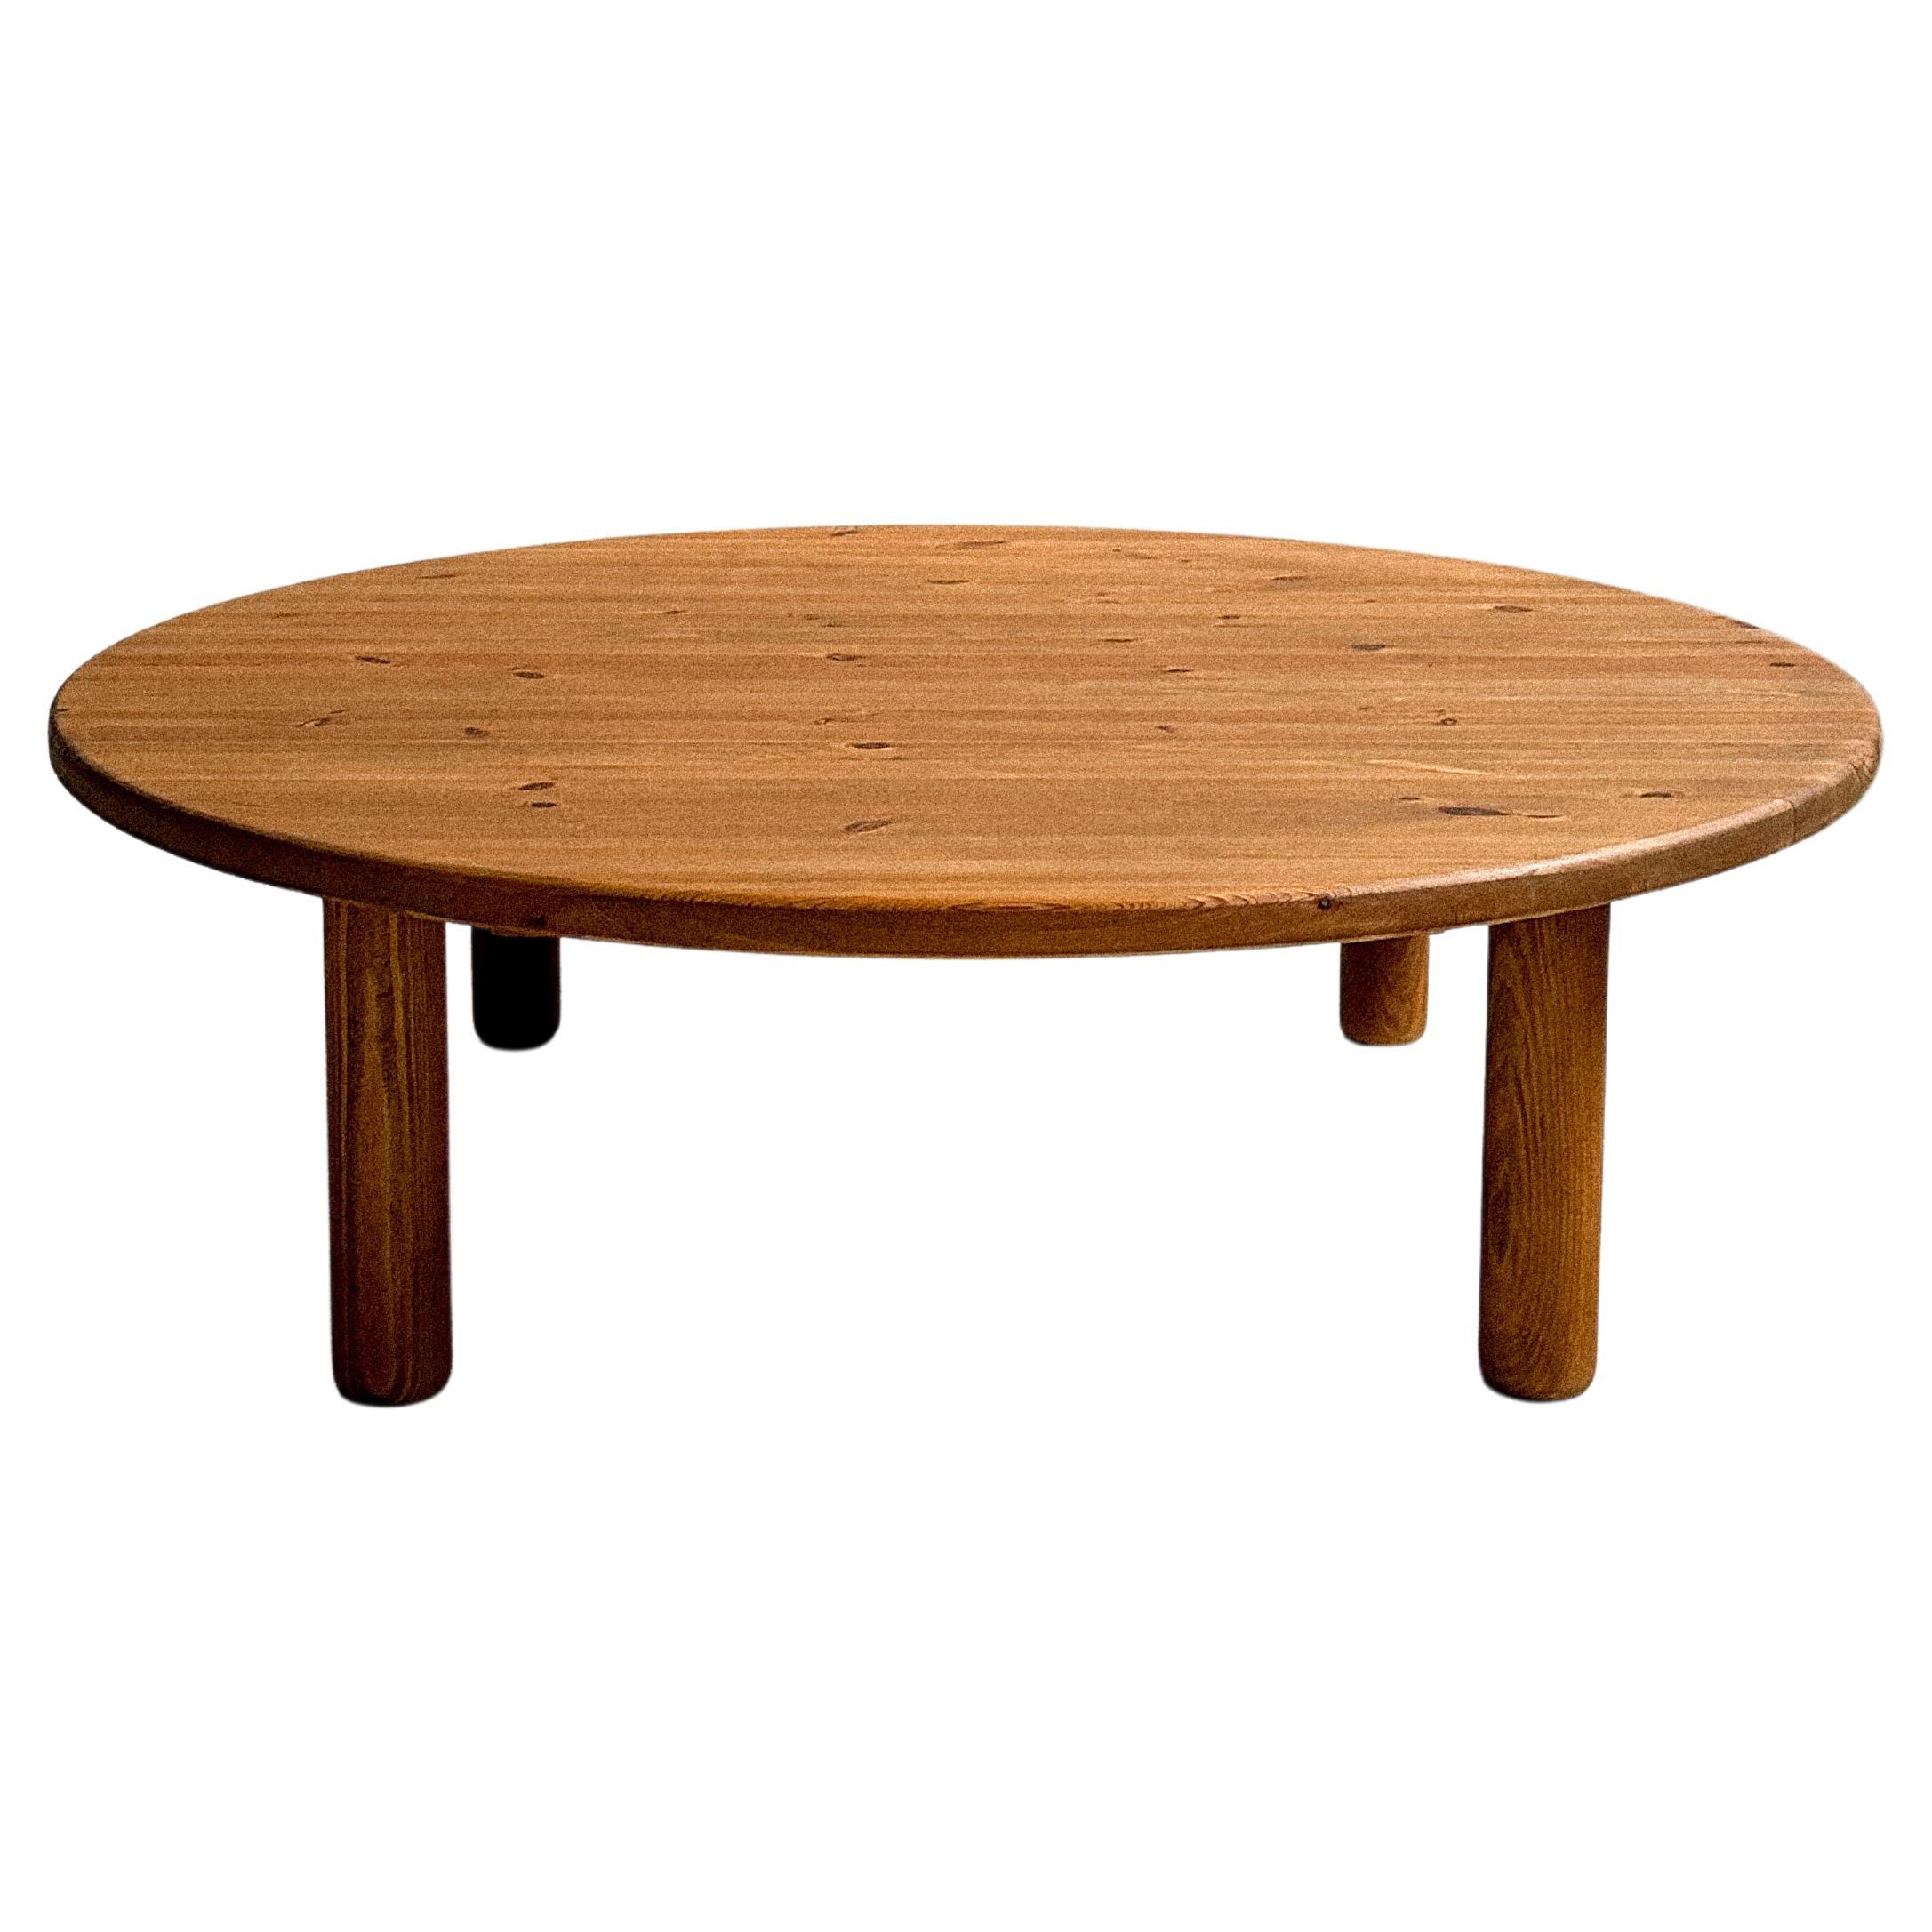 Midcentury Coffee Table in the Manner of Charlotte Perriand, Pine, circa 1960s